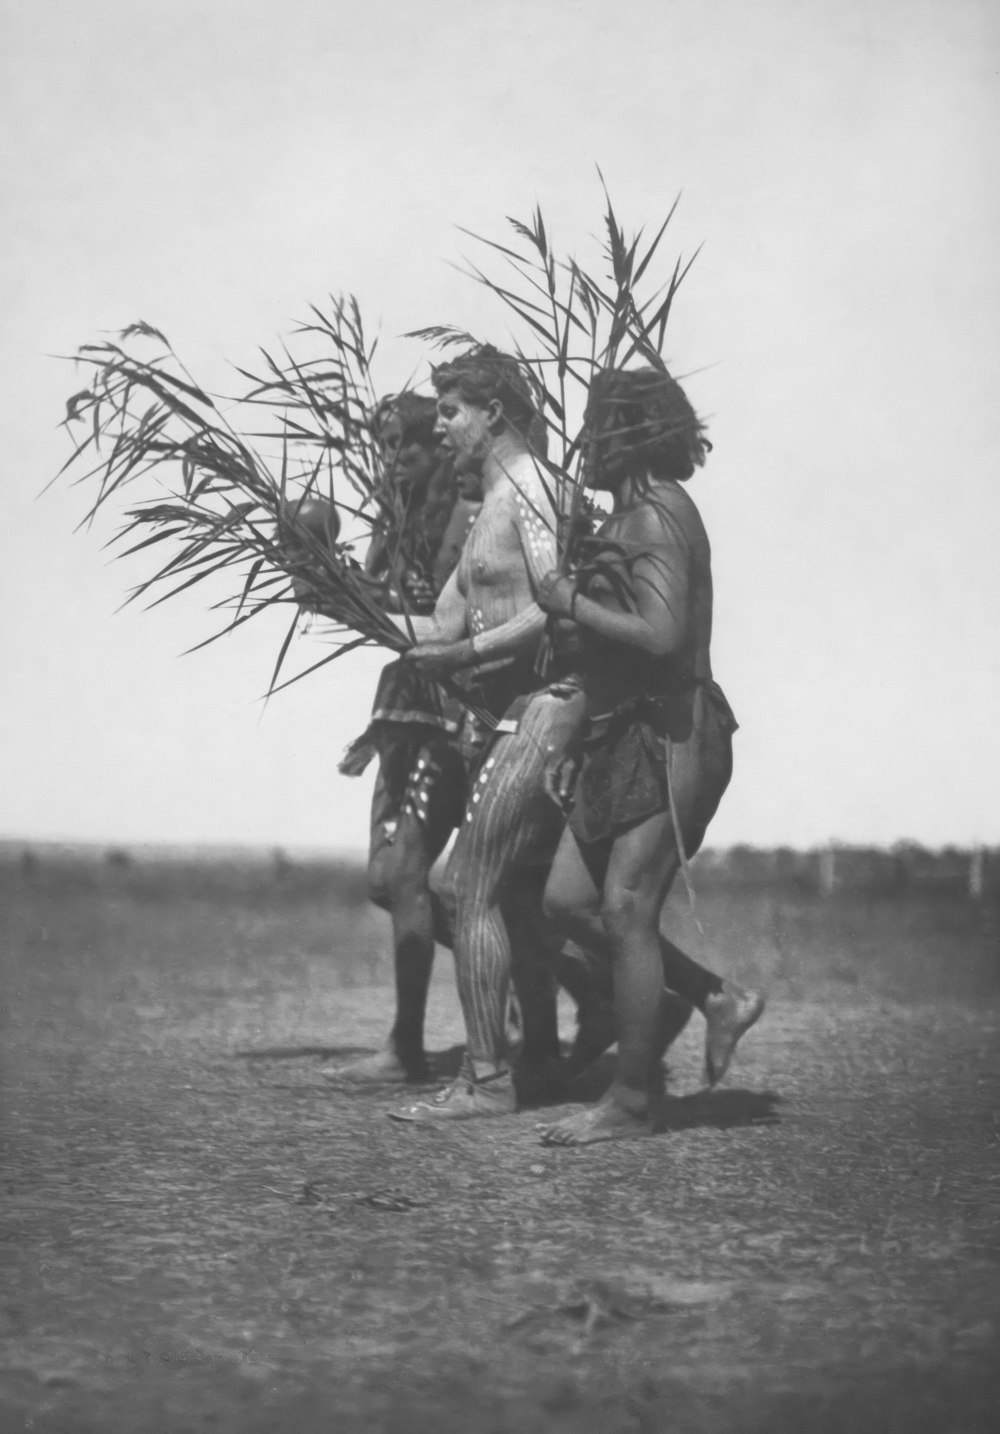 an old photo of a native american man holding a plant